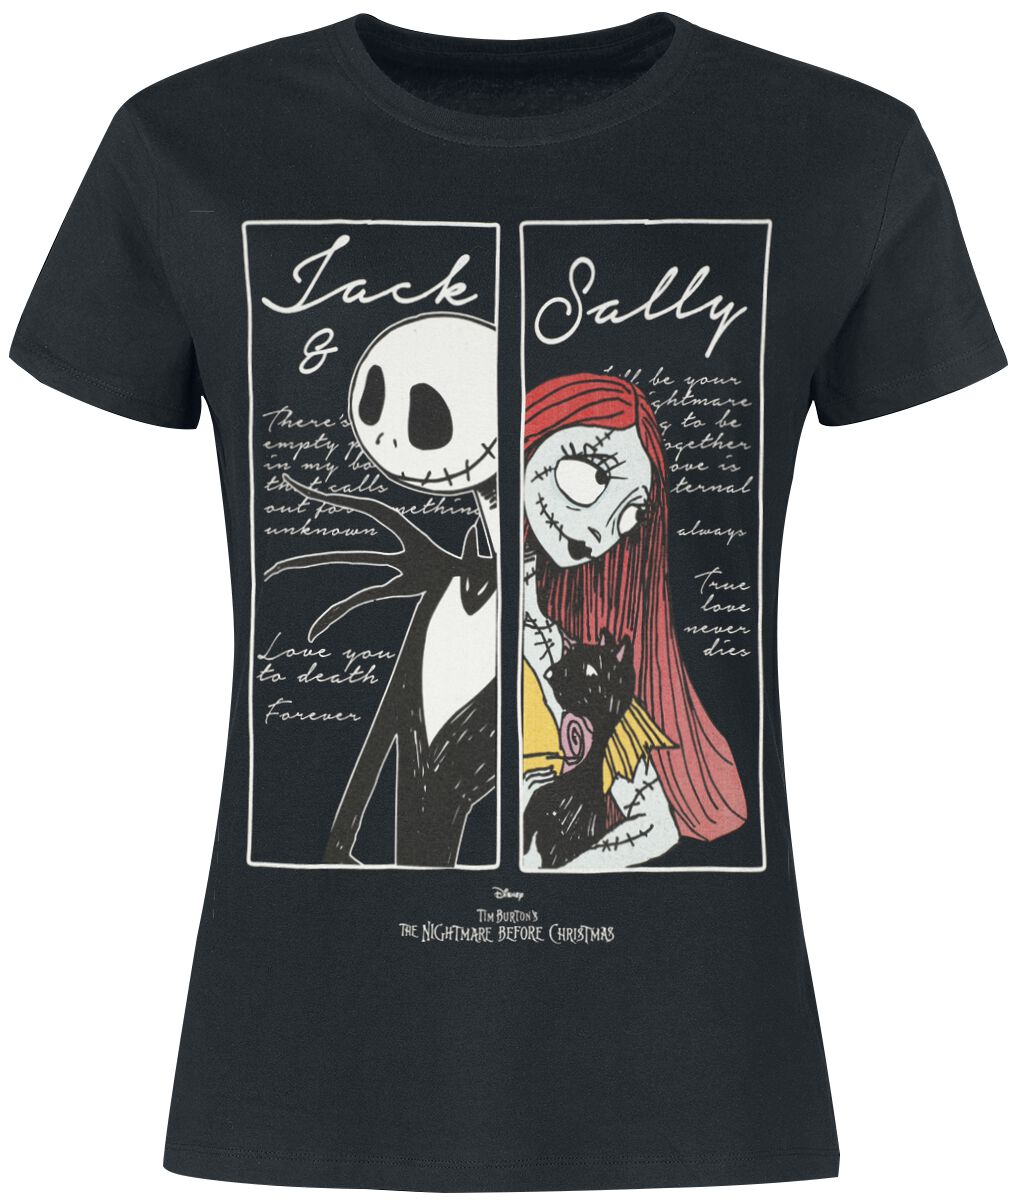 The Nightmare Before Christmas Jack & Sally T-Shirt schwarz in L